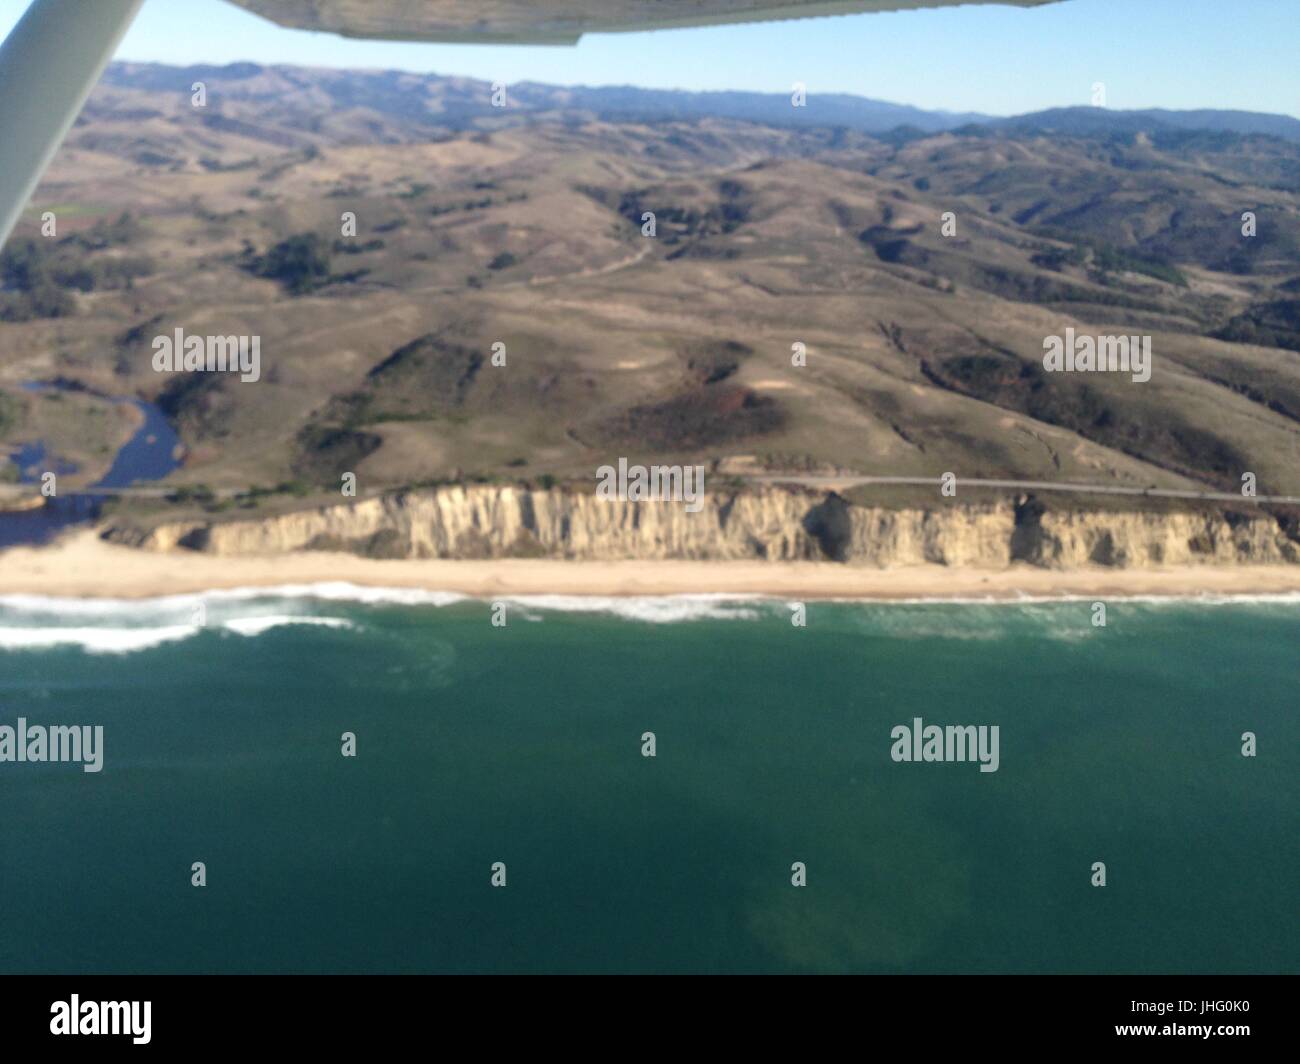 Flying from Palo Alto to Half Moon Bay, California in a small private airplane. Stock Photo